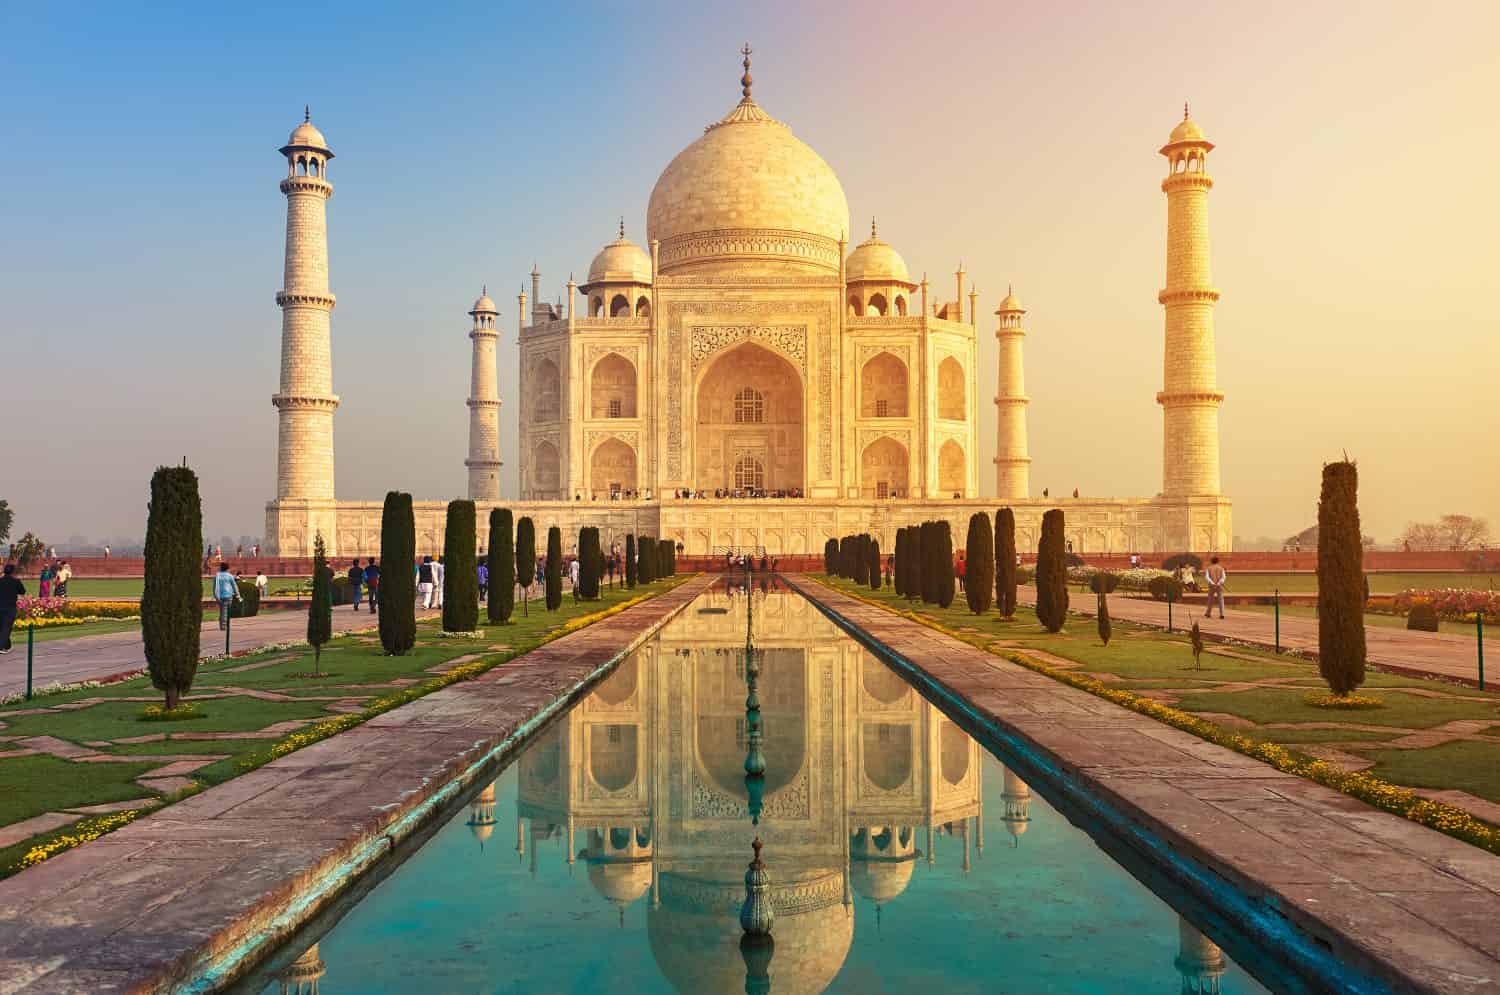 <p>India's <a href="https://a-z-animals.com/articles/discover-how-and-why-the-taj-mahal-was-built/?utm_campaign=msn&utm_source=msn_slideshow&utm_content=1325965&utm_medium=in_content">Taj Mahal</a> is a mausoleum commissioned by Shah Jahan in 1631, but not completed until 1653. Shah Jahan wanted this incredible building to honor his wife Mumtaz Mahal. Its instantly recognizable dome is 115 feet tall, nearly the same height as its walls. It's an incredible example of Mughal architecture and India's most famous building. The Taj Mahal is located in Utter Pradesh on the Yamuna River's banks. Each year 8 million tourists admire its ivory walls.</p><p>Sharks, lions, alligators, and more! Don’t miss today’s latest and most exciting animal news. <strong><a href="https://www.msn.com/en-us/channel/source/AZ%20Animals%20US/sr-vid-7etr9q8xun6k6508c3nufaum0de3dqktiq6h27ddeagnfug30wka">Click here to access the A-Z Animals profile page</a> and be sure to hit the <em>Follow</em> button here or at the top of this article!</strong></p> <p>Have feedback? Add a comment below!</p>